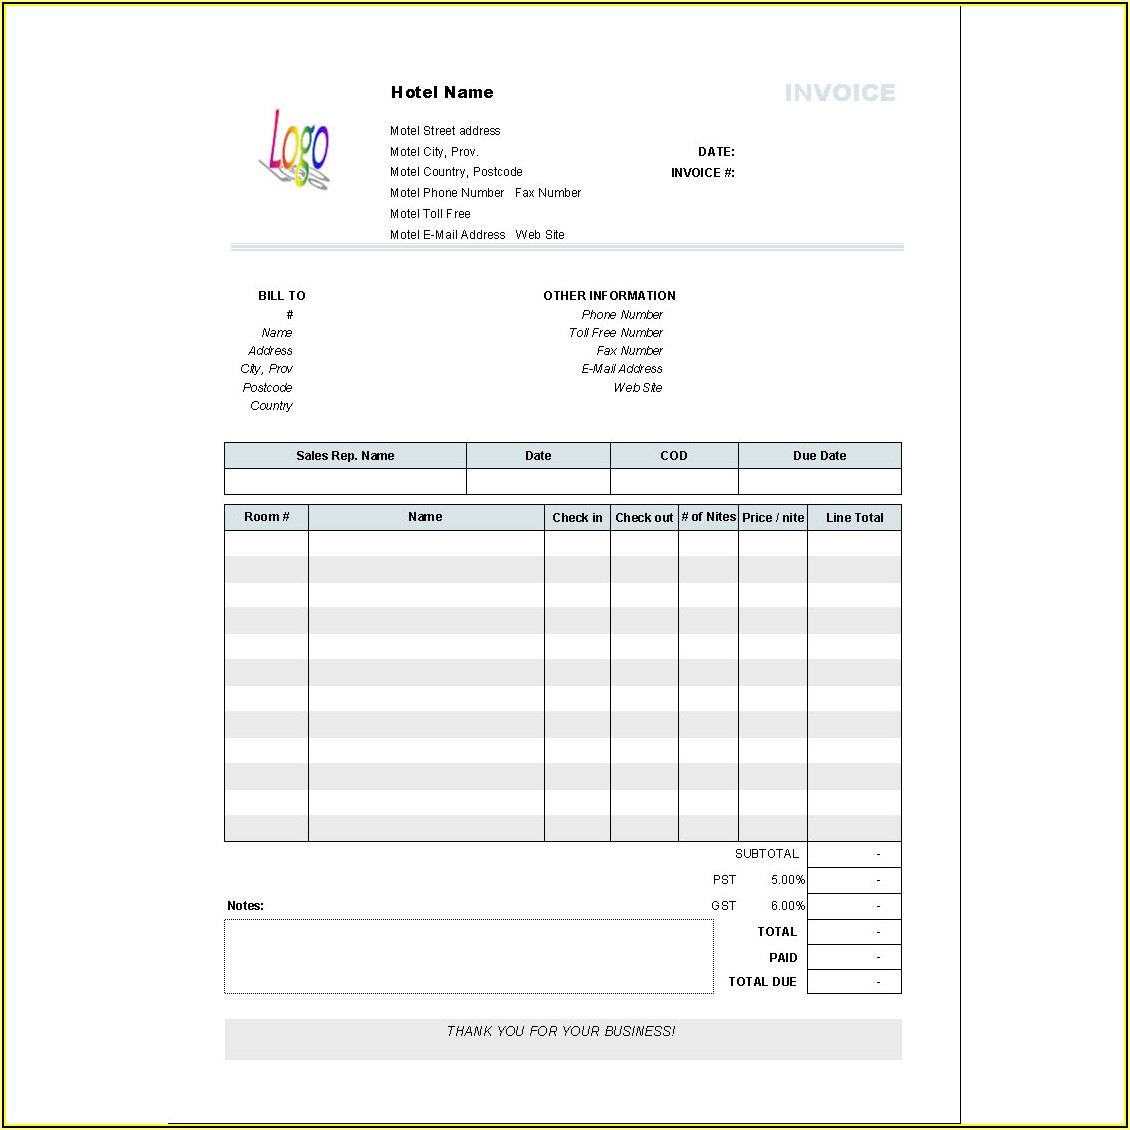 Hotel Invoice Template Free Download